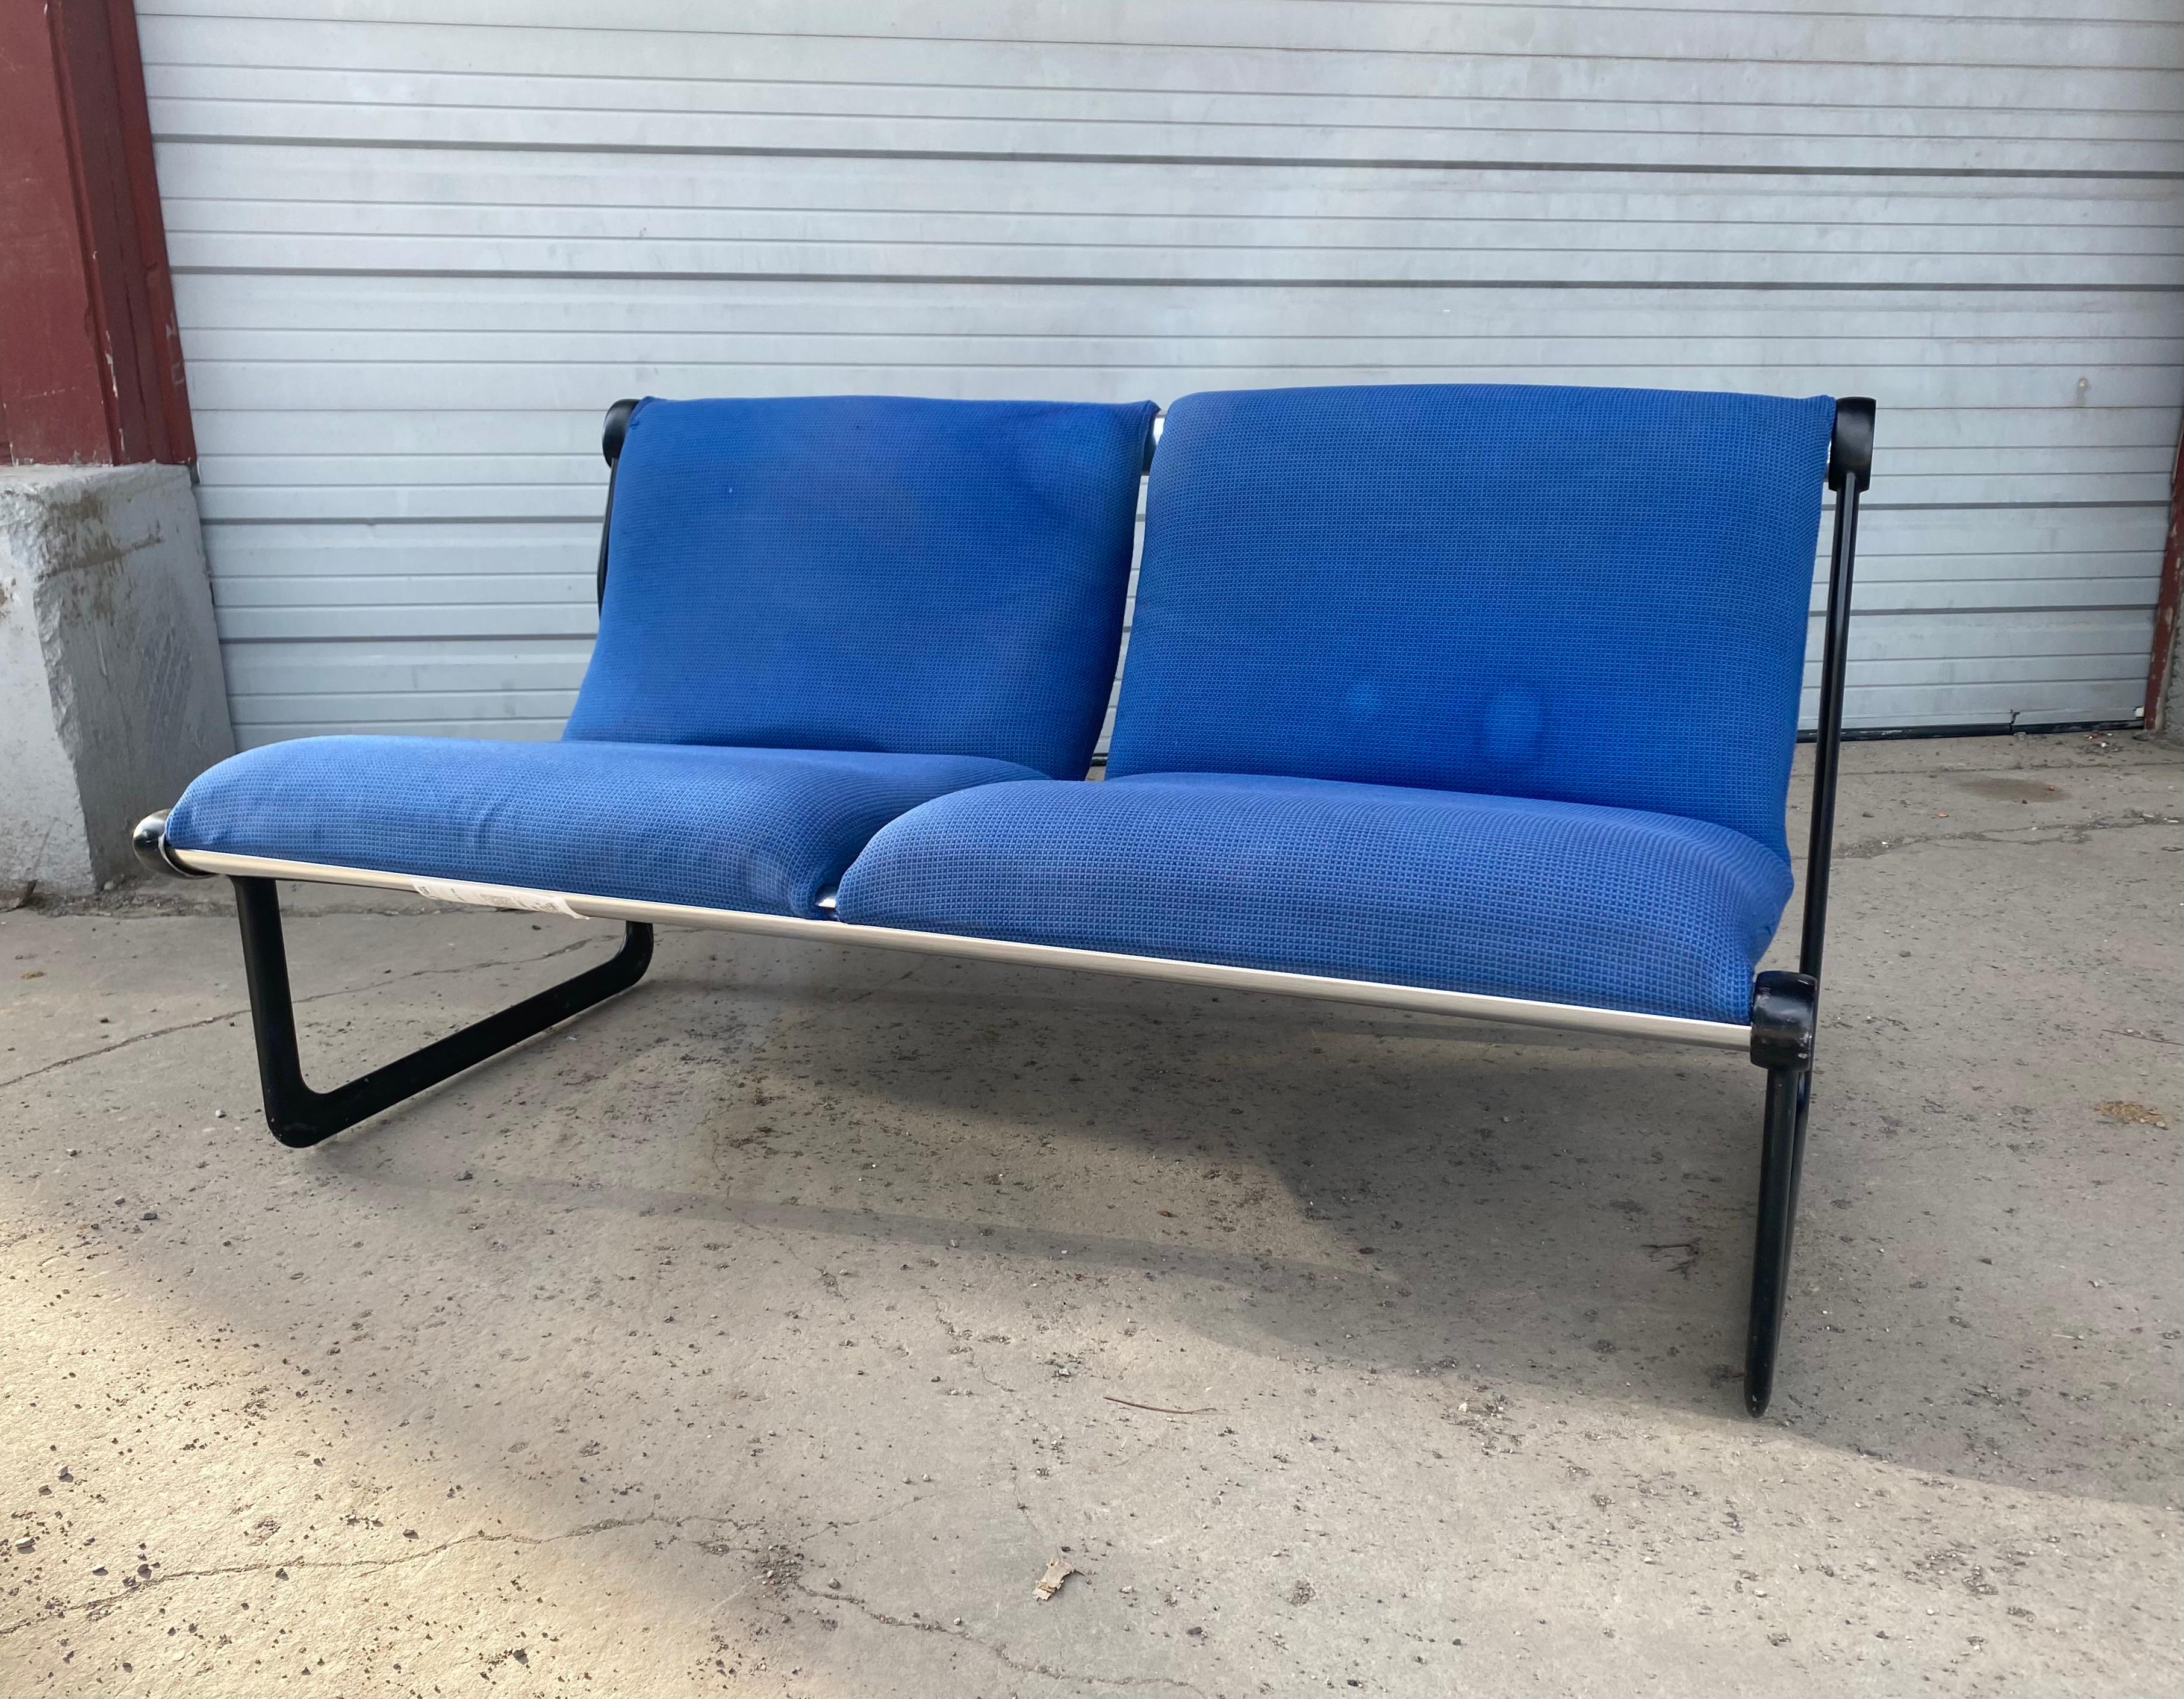 Mid-Century Modern Classic Modernist Two-Seat Sling Sofa by Hannah Morrison for Knoll